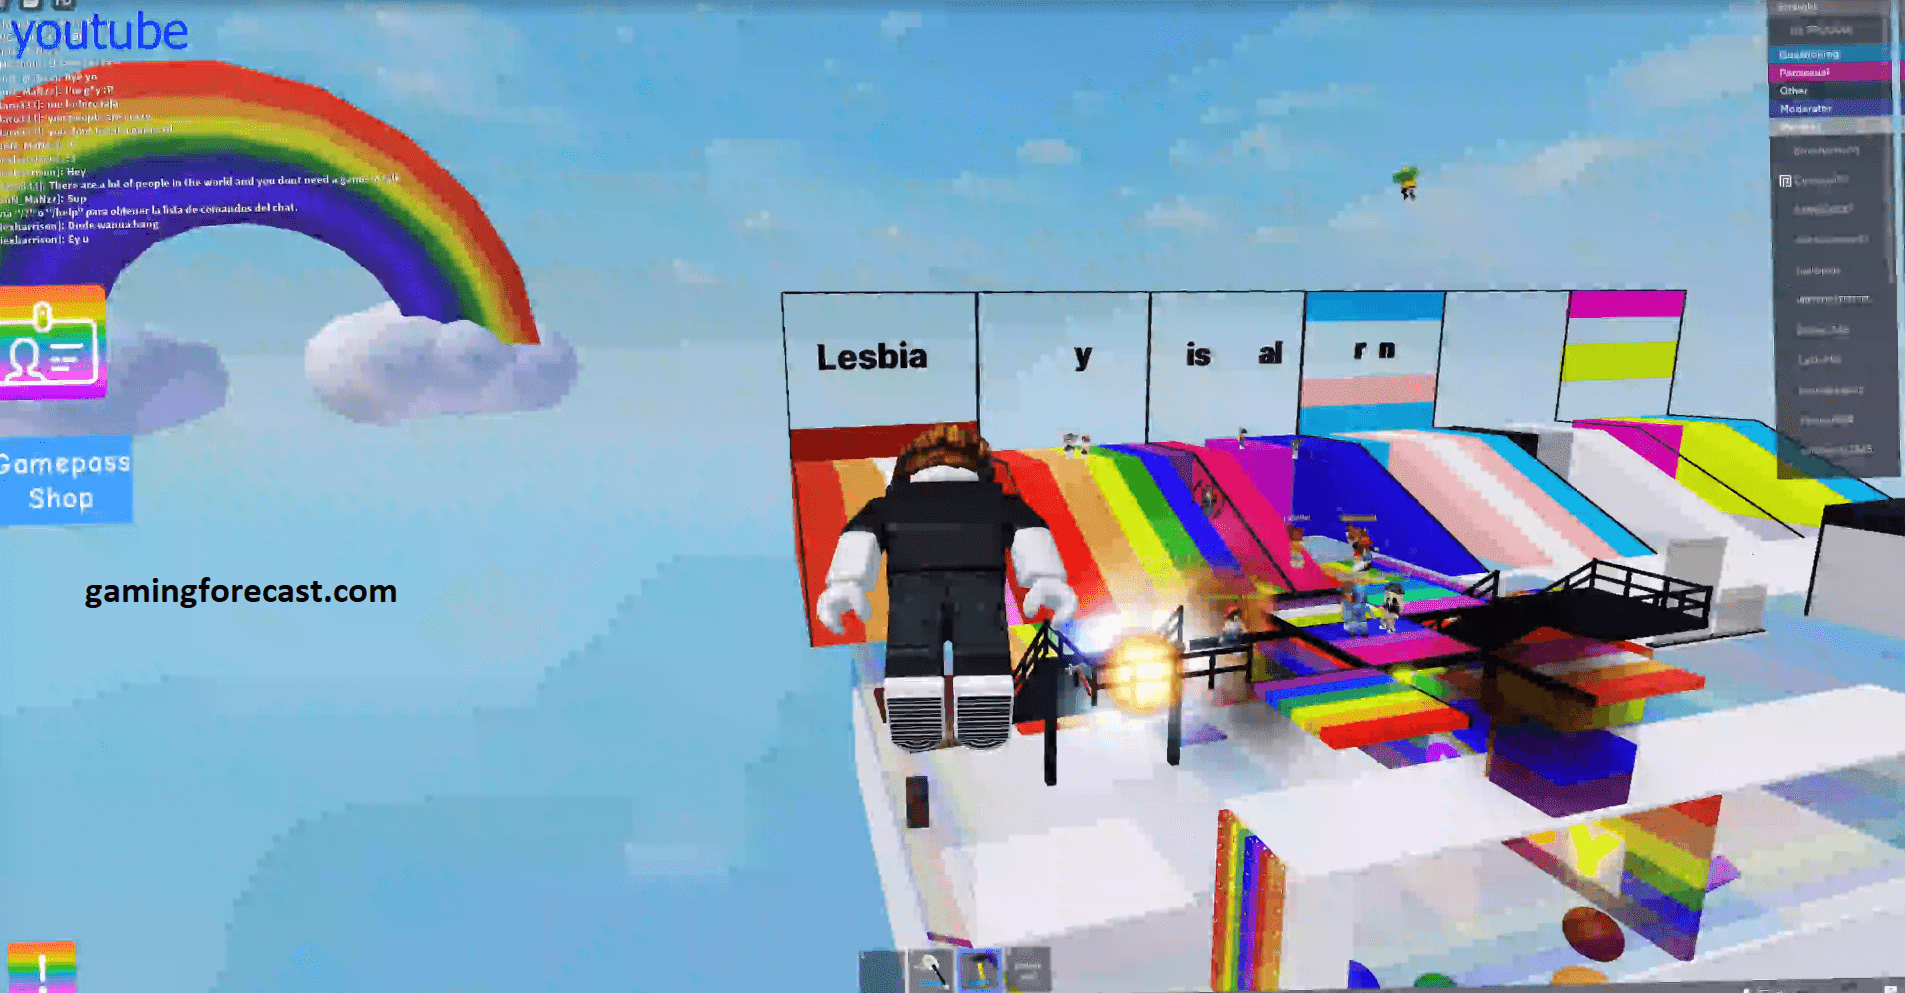 Roblox Hack Download Pc Destroy Lobby Fly Aimbot Scripts 2021 Gaming Forecast Download Free Online Game Hacks - roblox hack v1 2 download